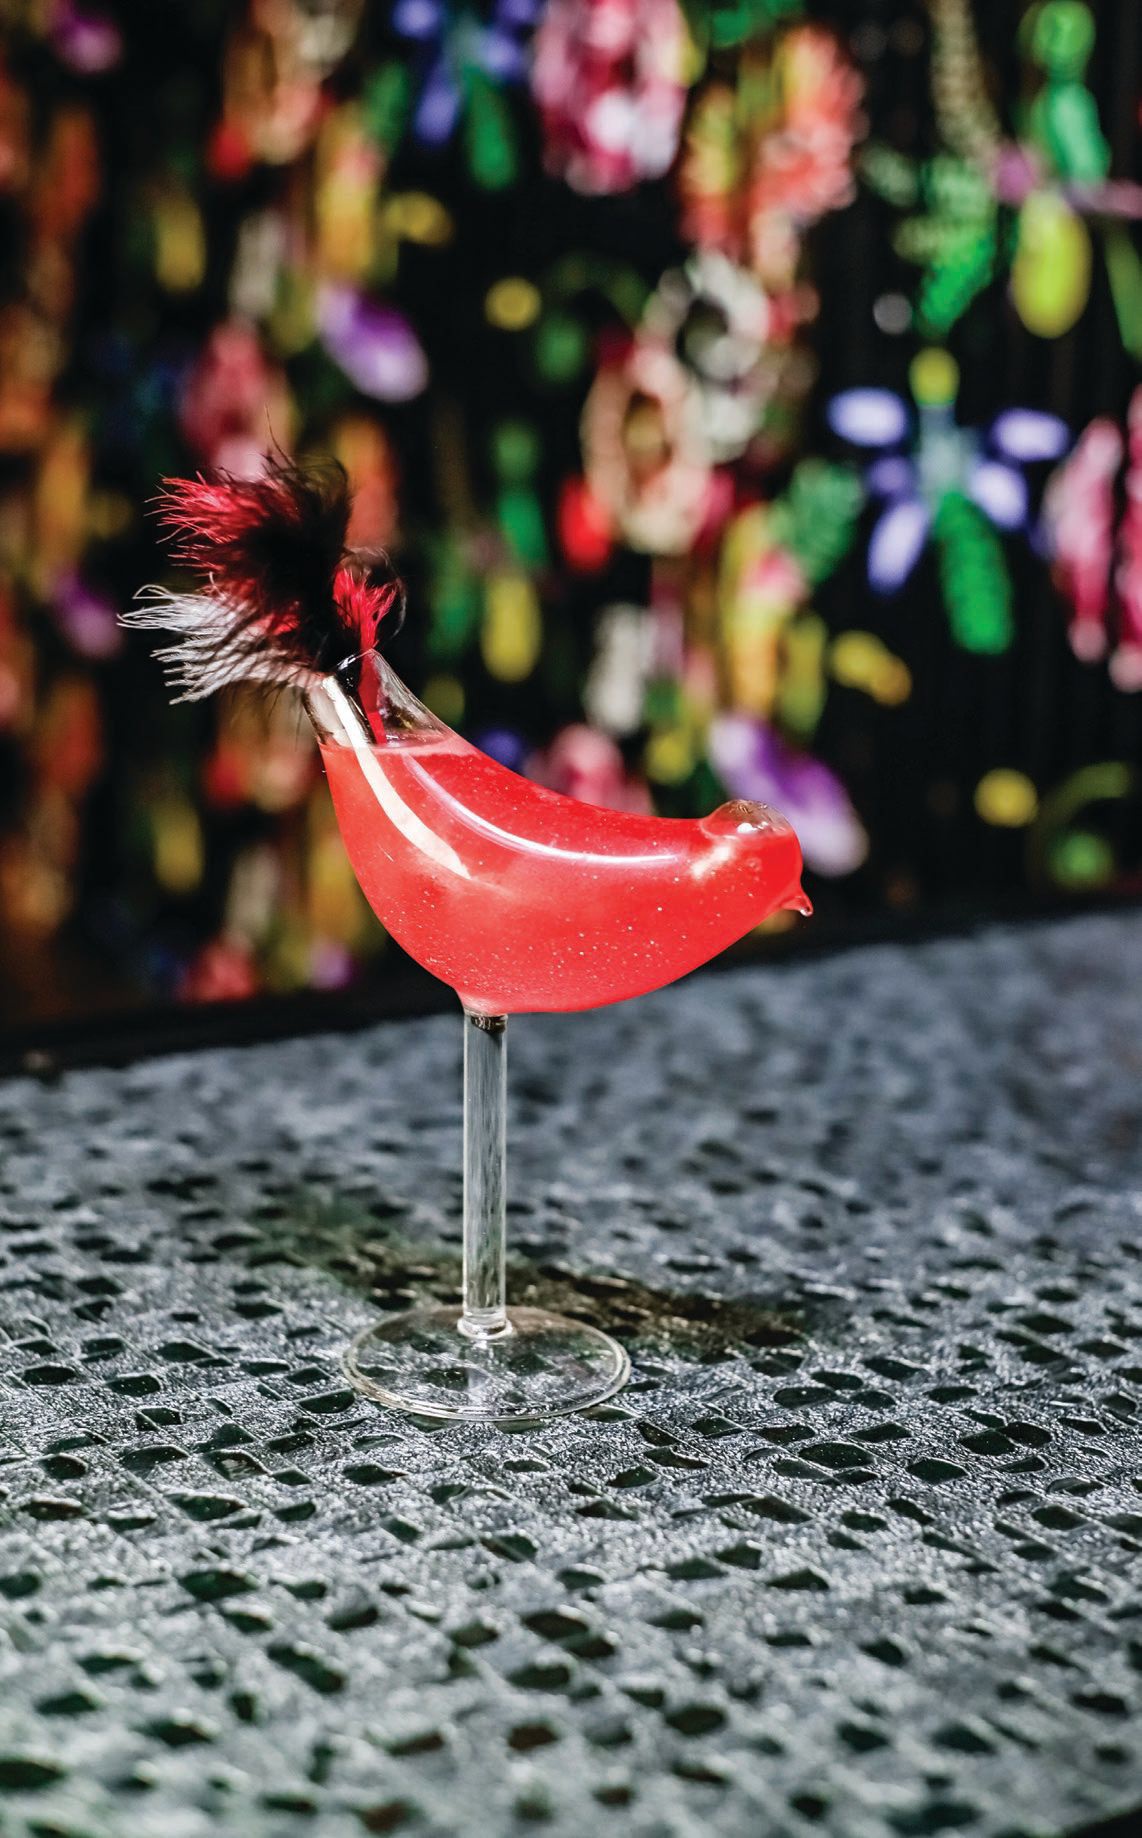 Eye-catching cocktails at Harper’s include the Bye Bye Birdie made with Grey Goose Le Citron, orange liqueur, cranberry, fresh lime, lemon grass reduction and luster dust. PHOTO BY KAYLA ENRIGHT